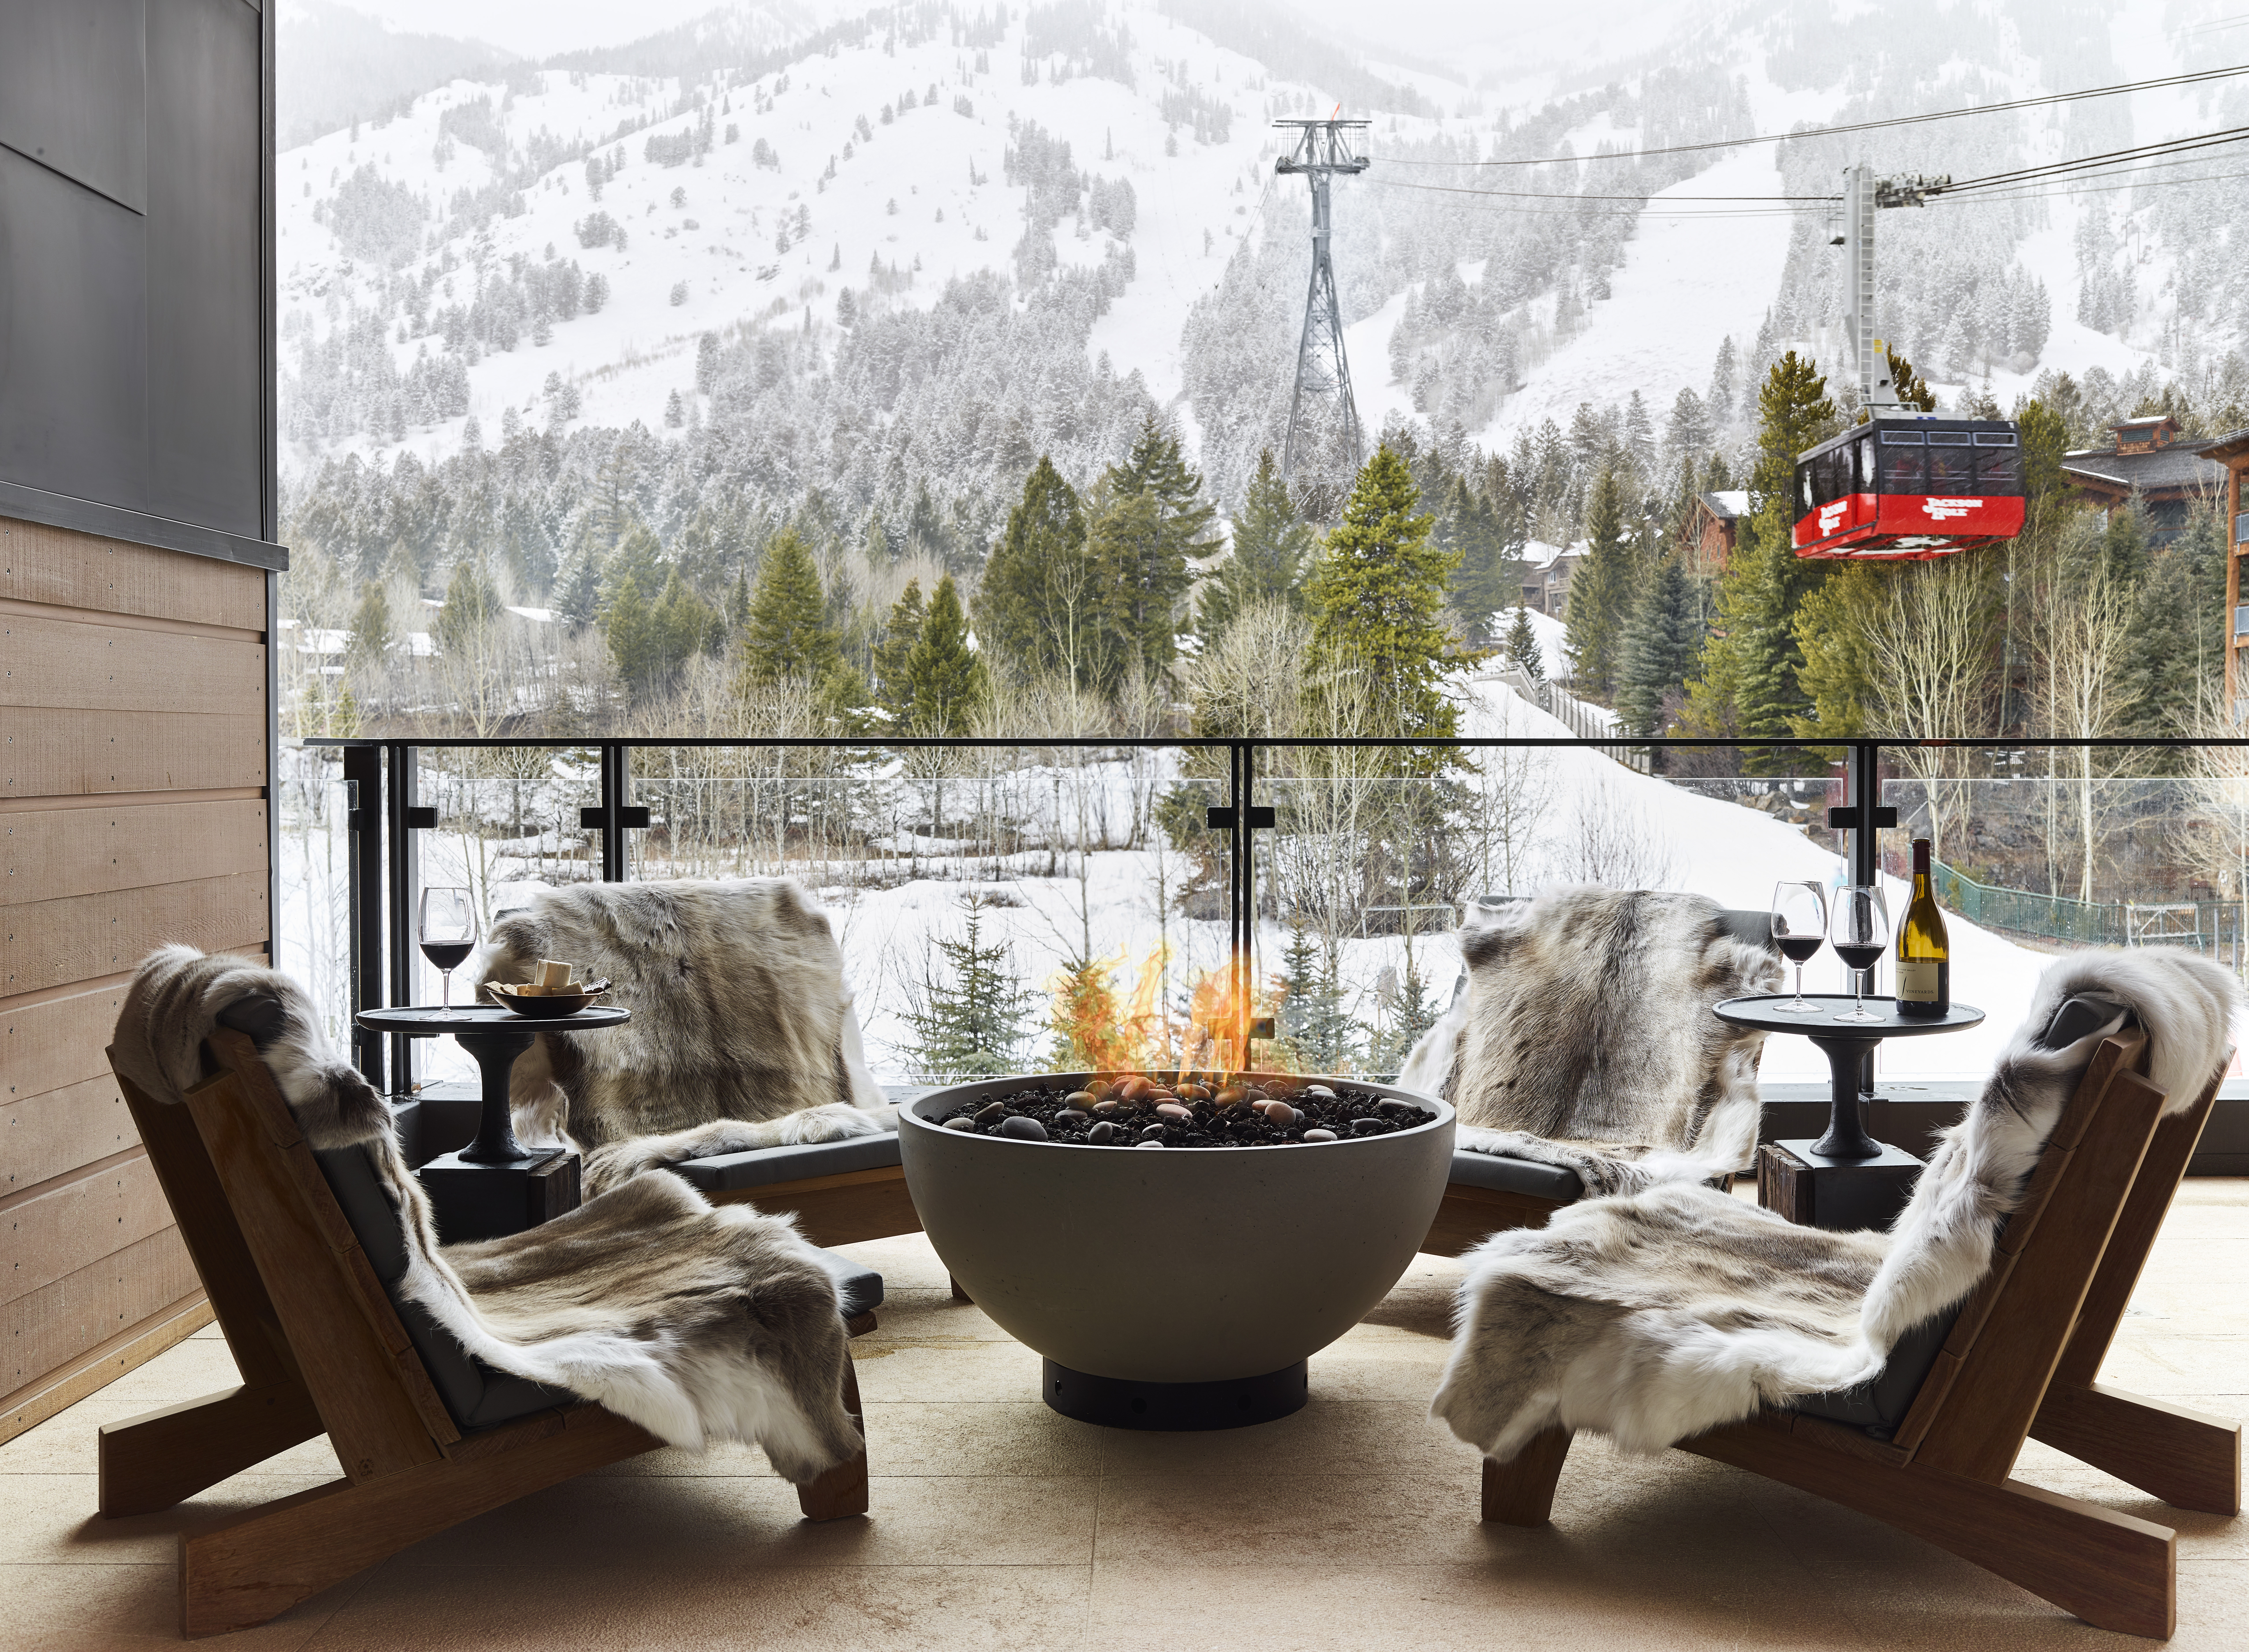 A fire pit at Caldera House in Jackson Hole.